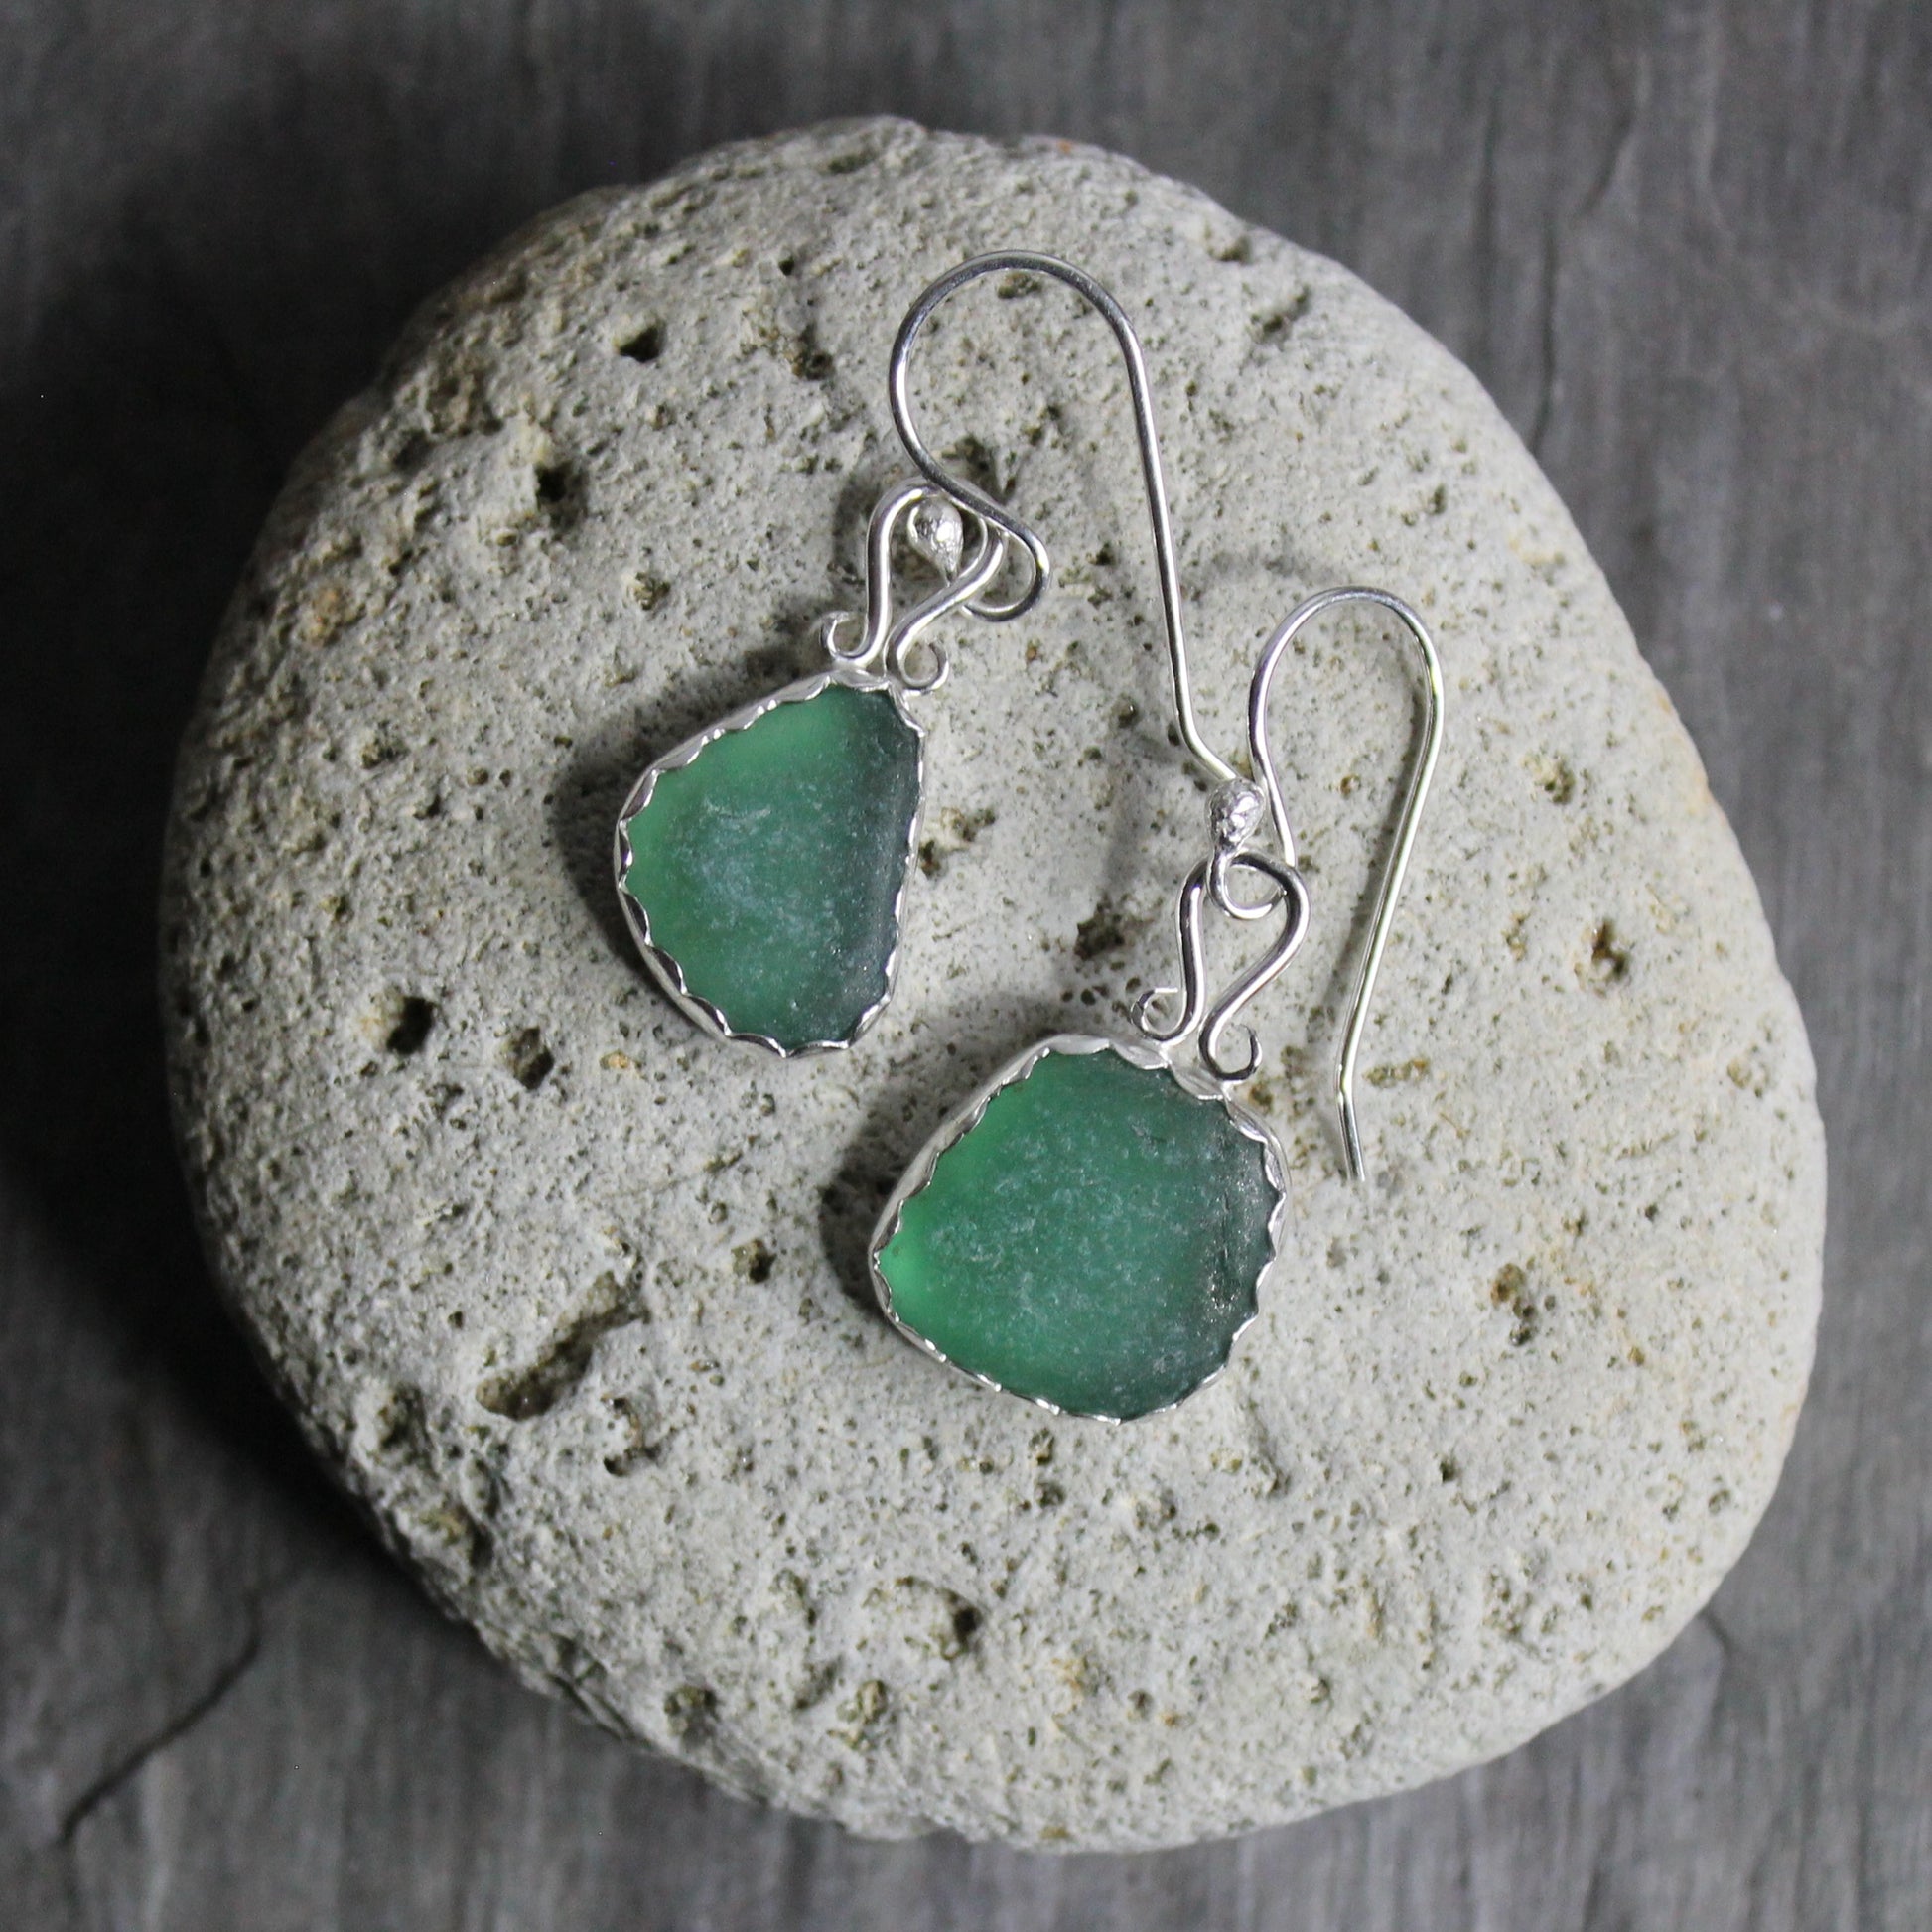 Dark green dangly sea glass earrings made with a sterling and fine silver scalloped bezel setting and a fancy bail on sterling silver ear wires. 